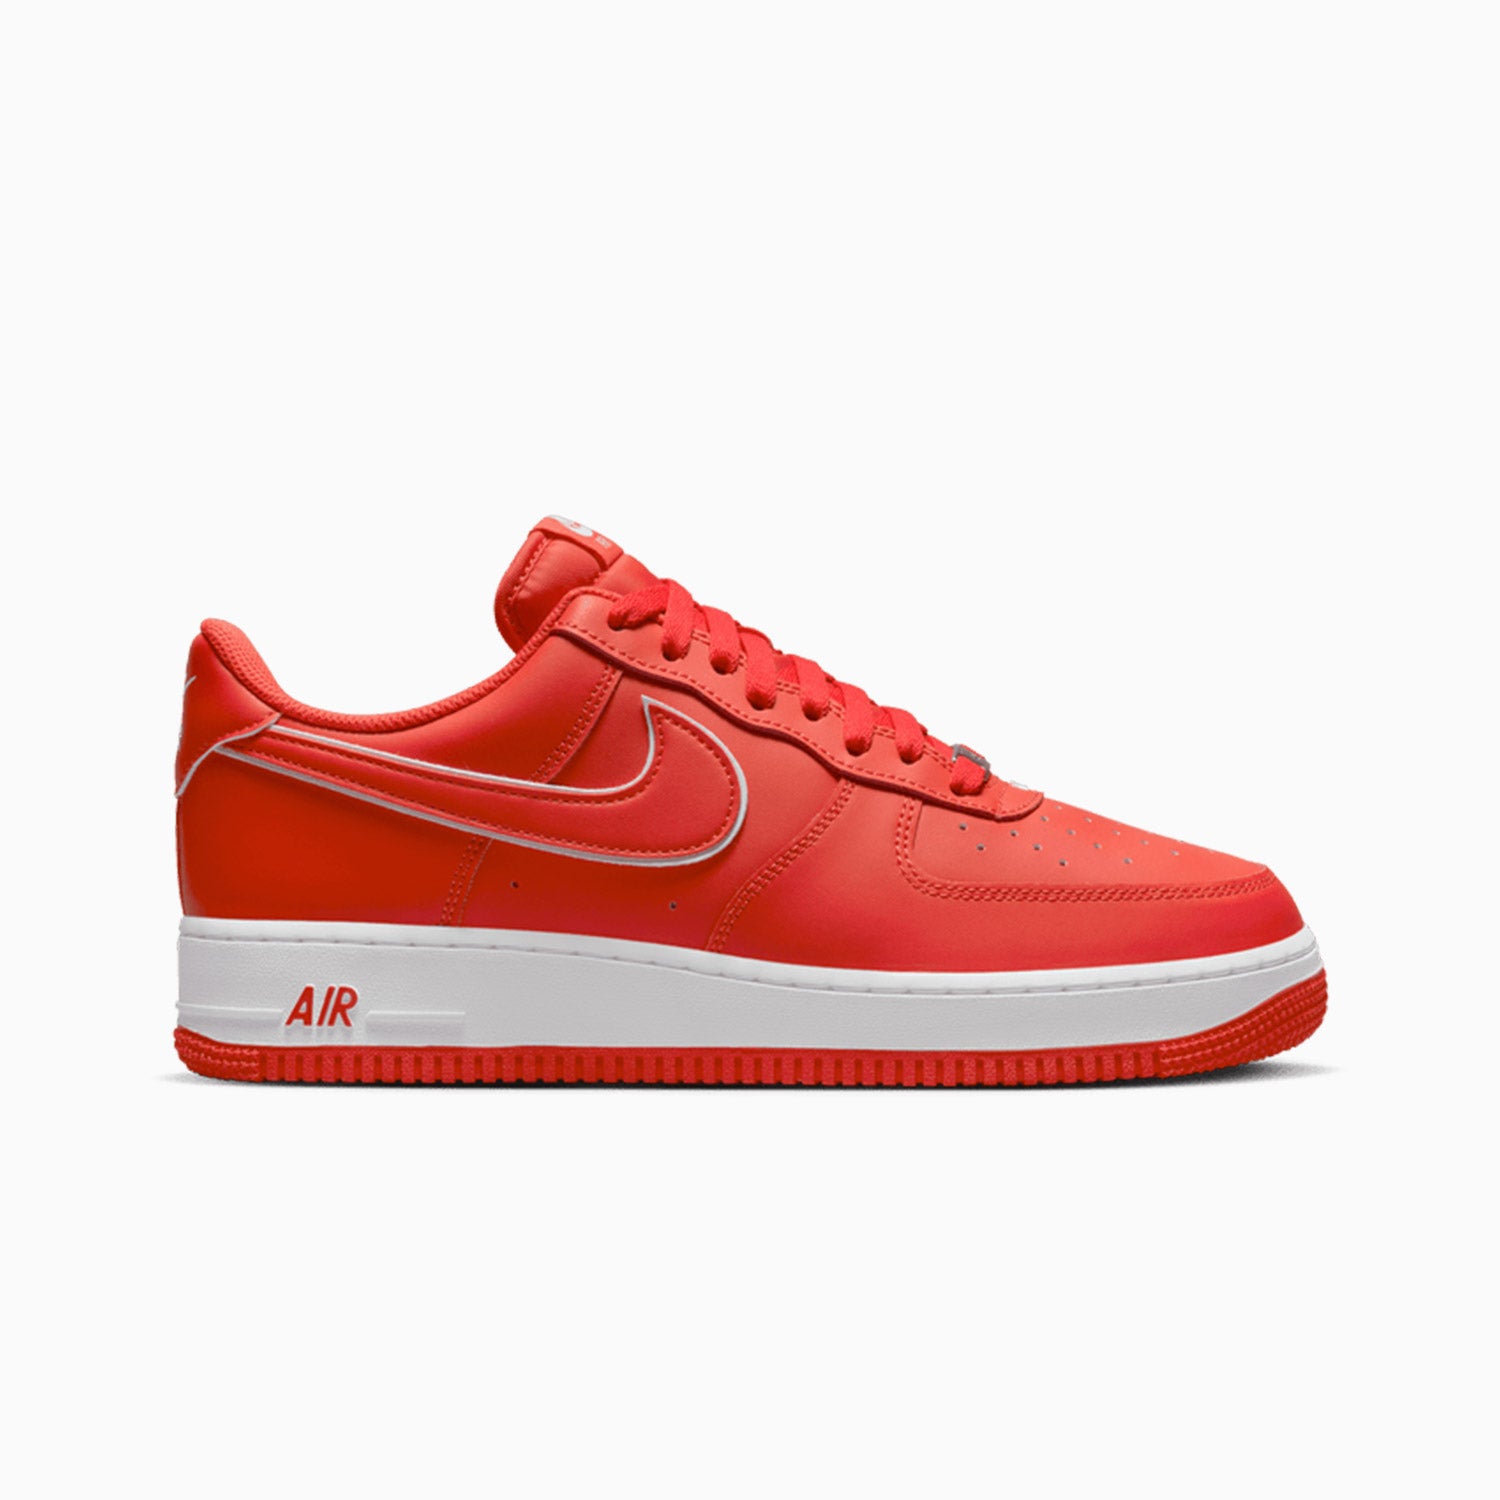 nike-mens-nike-air-force-1-07-picante-red-shoes-dv0788-600